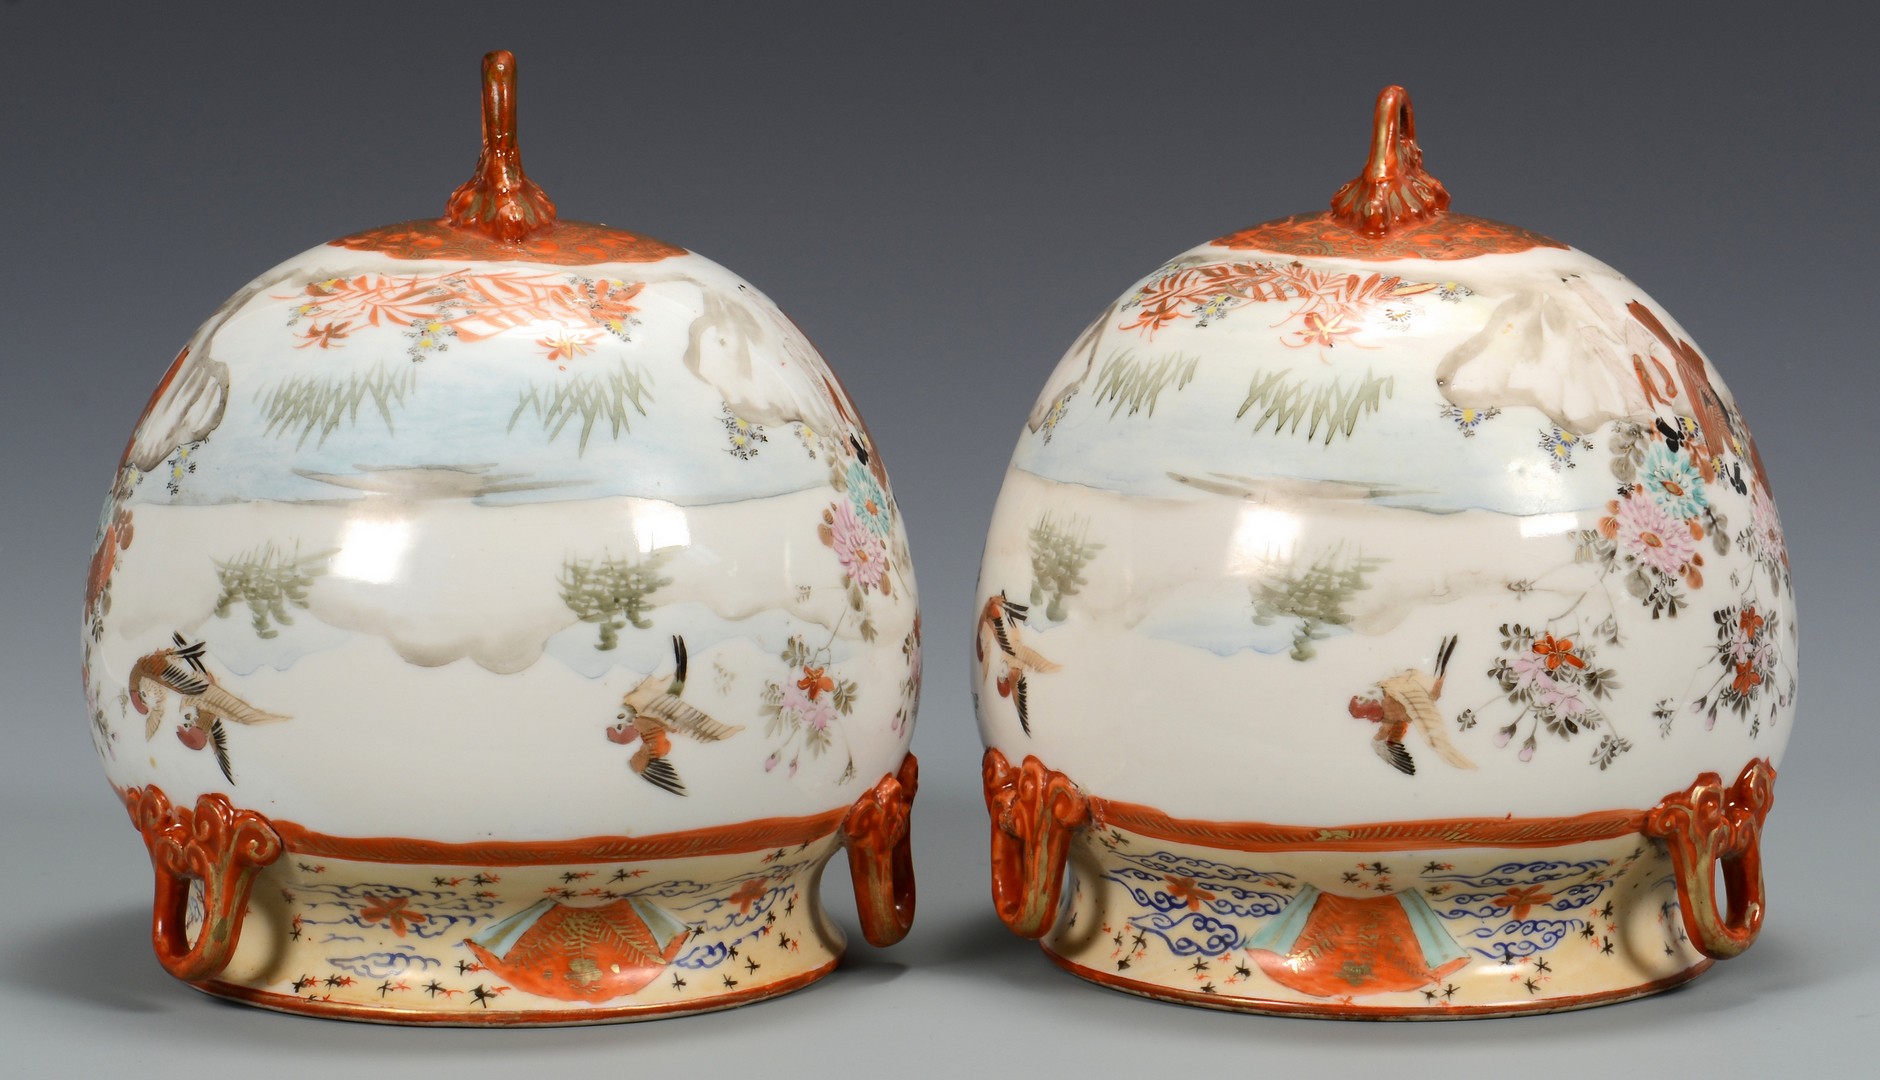 Lot 871: 4 Japanese items: 2 vases, 2 Ferners